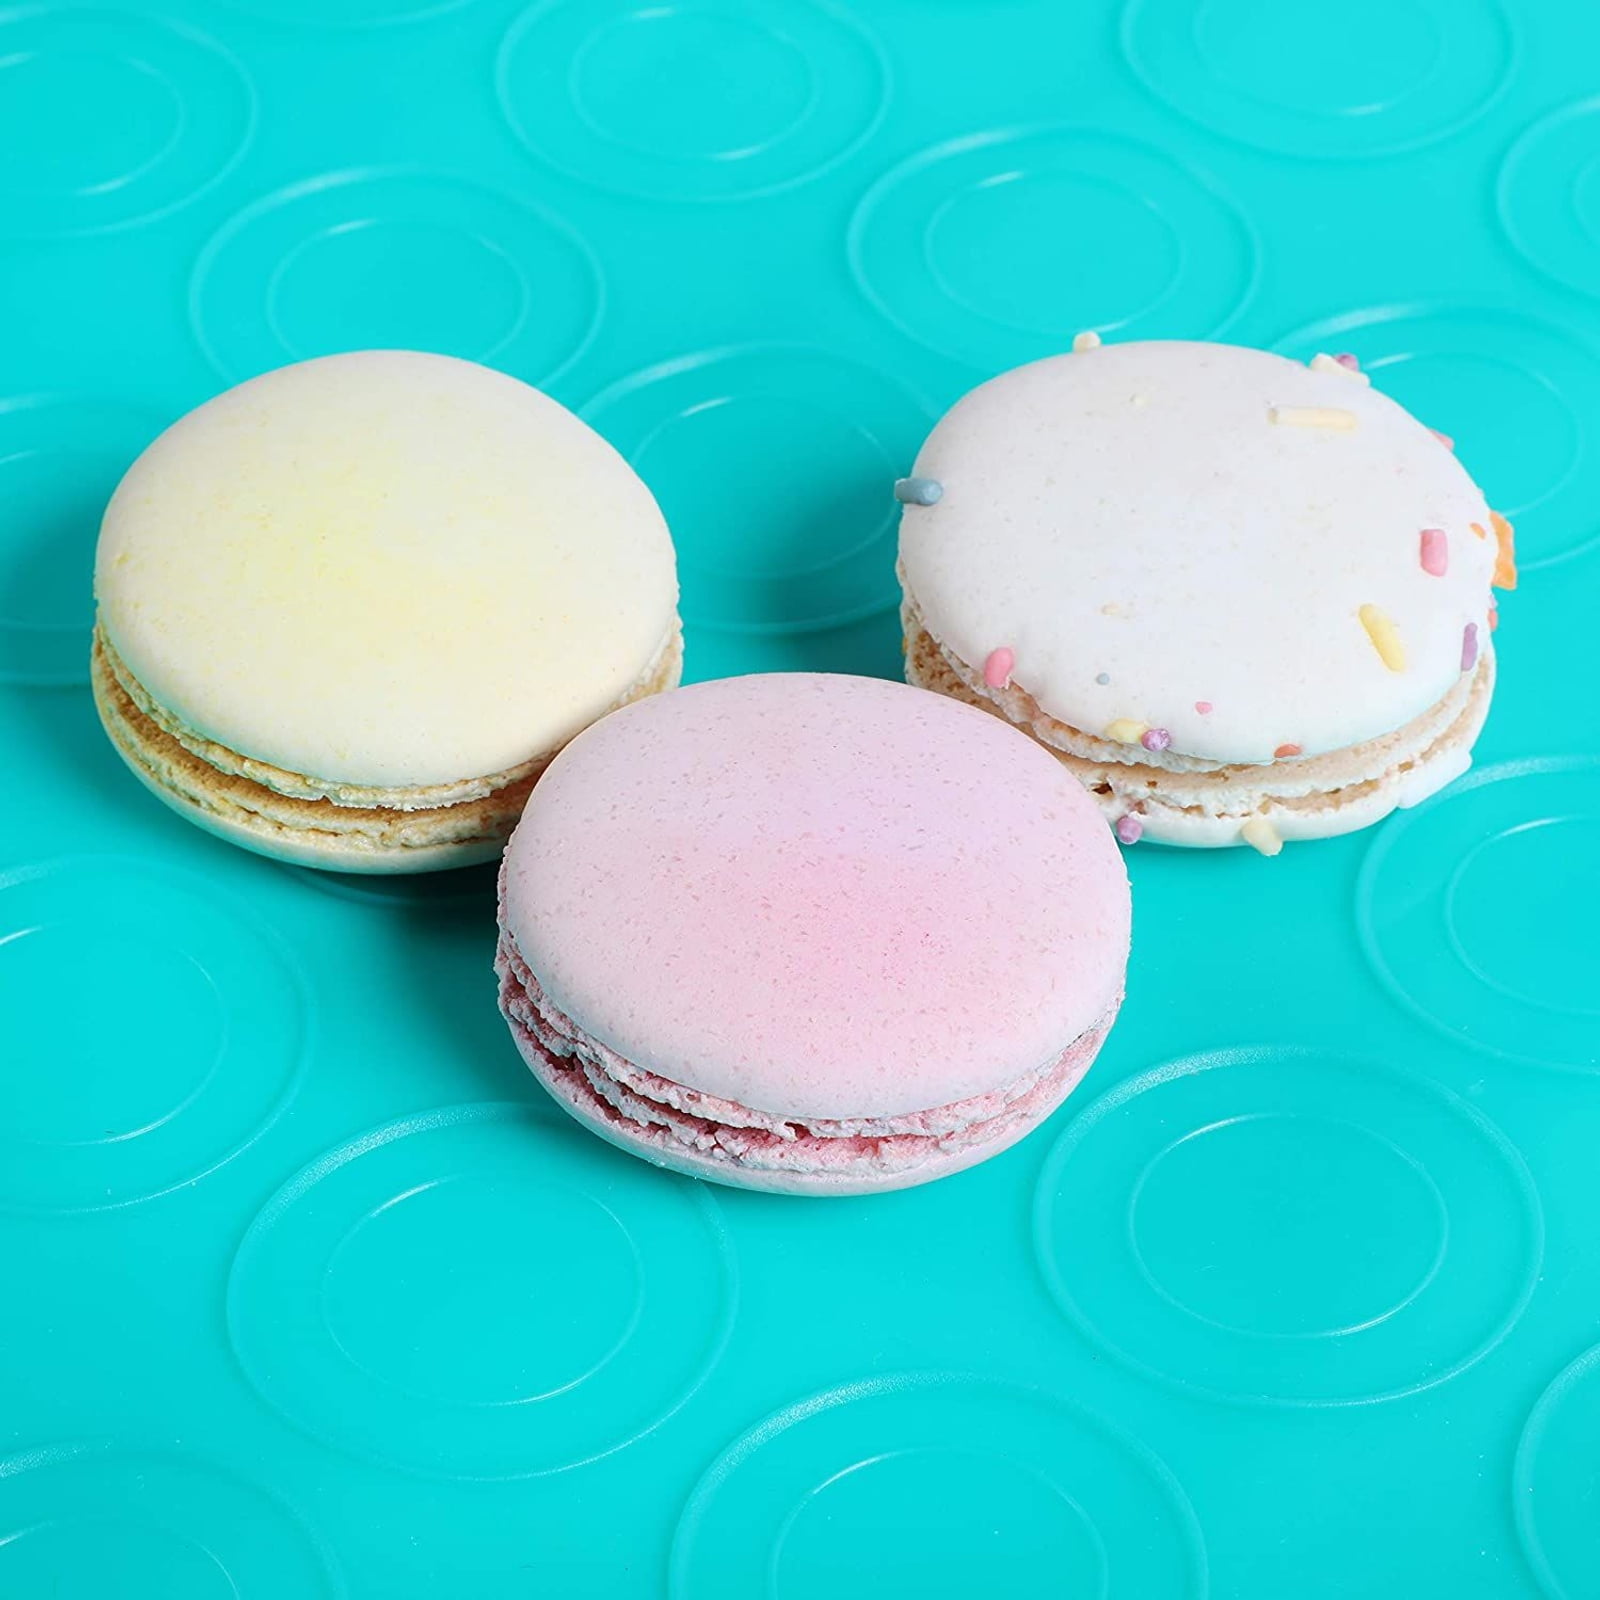 Mom Knows Best: Raspberry Macarons Made Easy With The Simple Baker Silicone Baking  Mat And a Giveaway